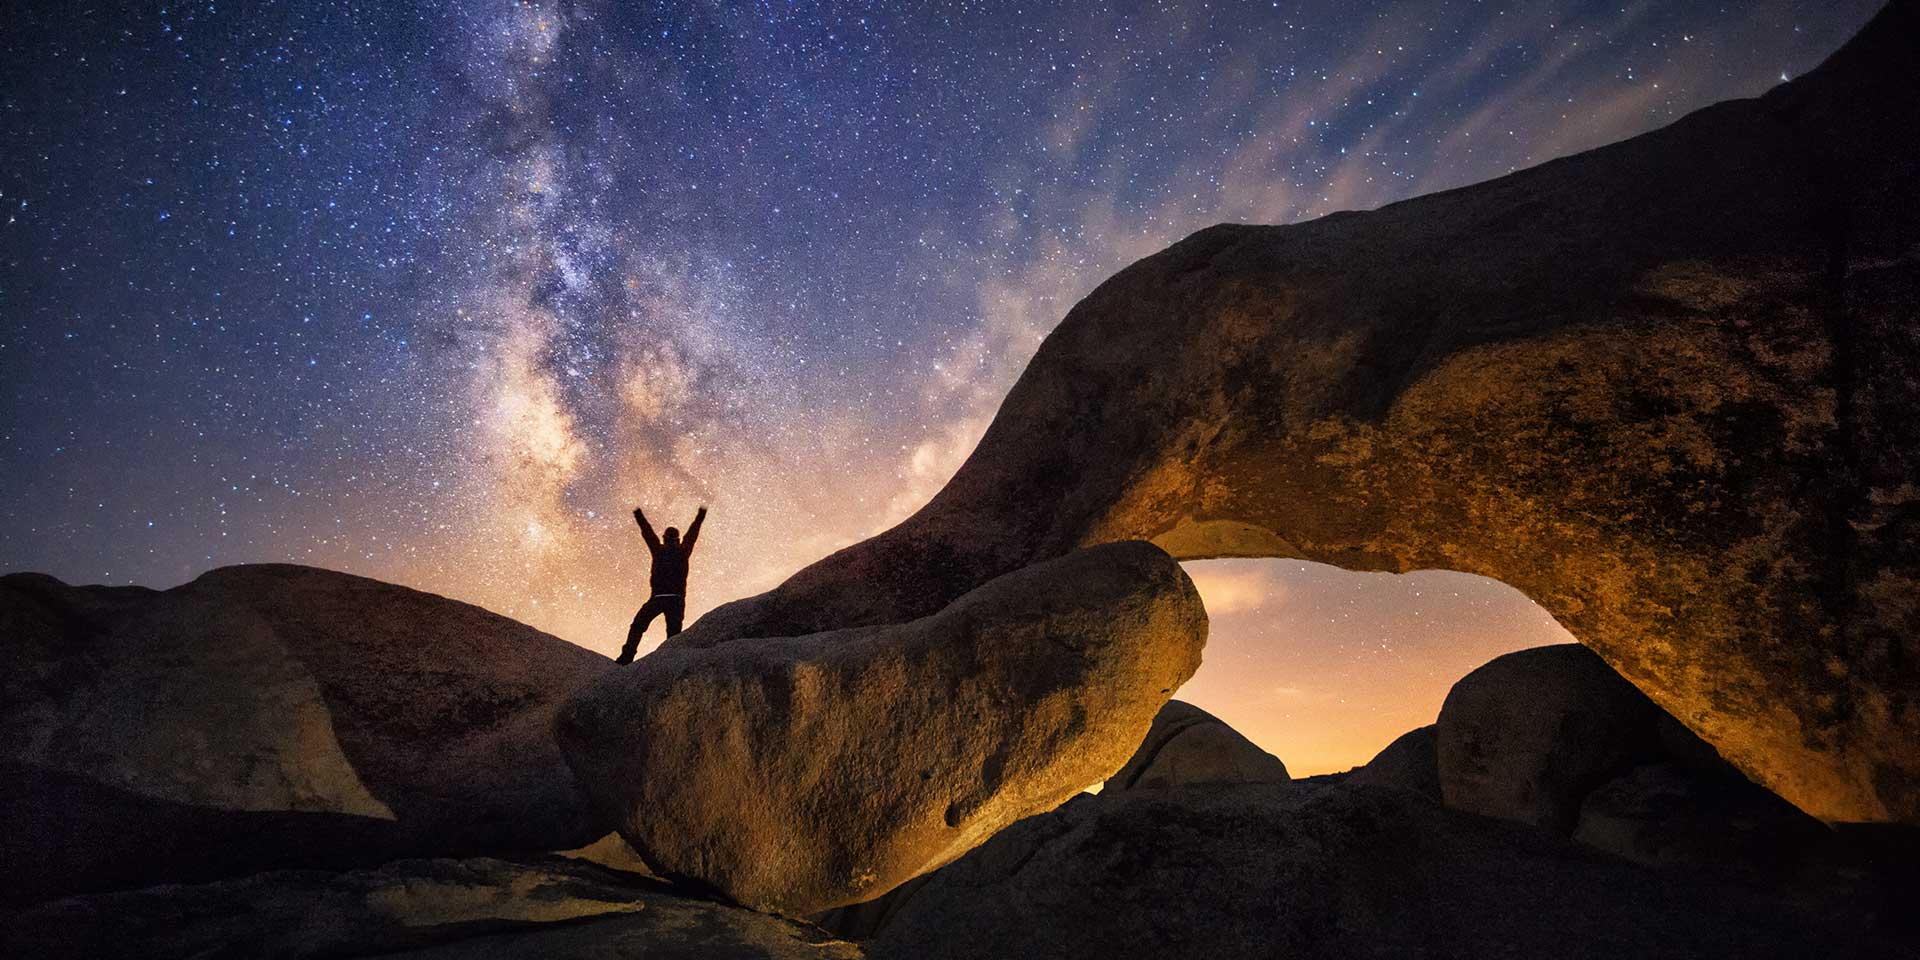 arch rock in joshua tree national park